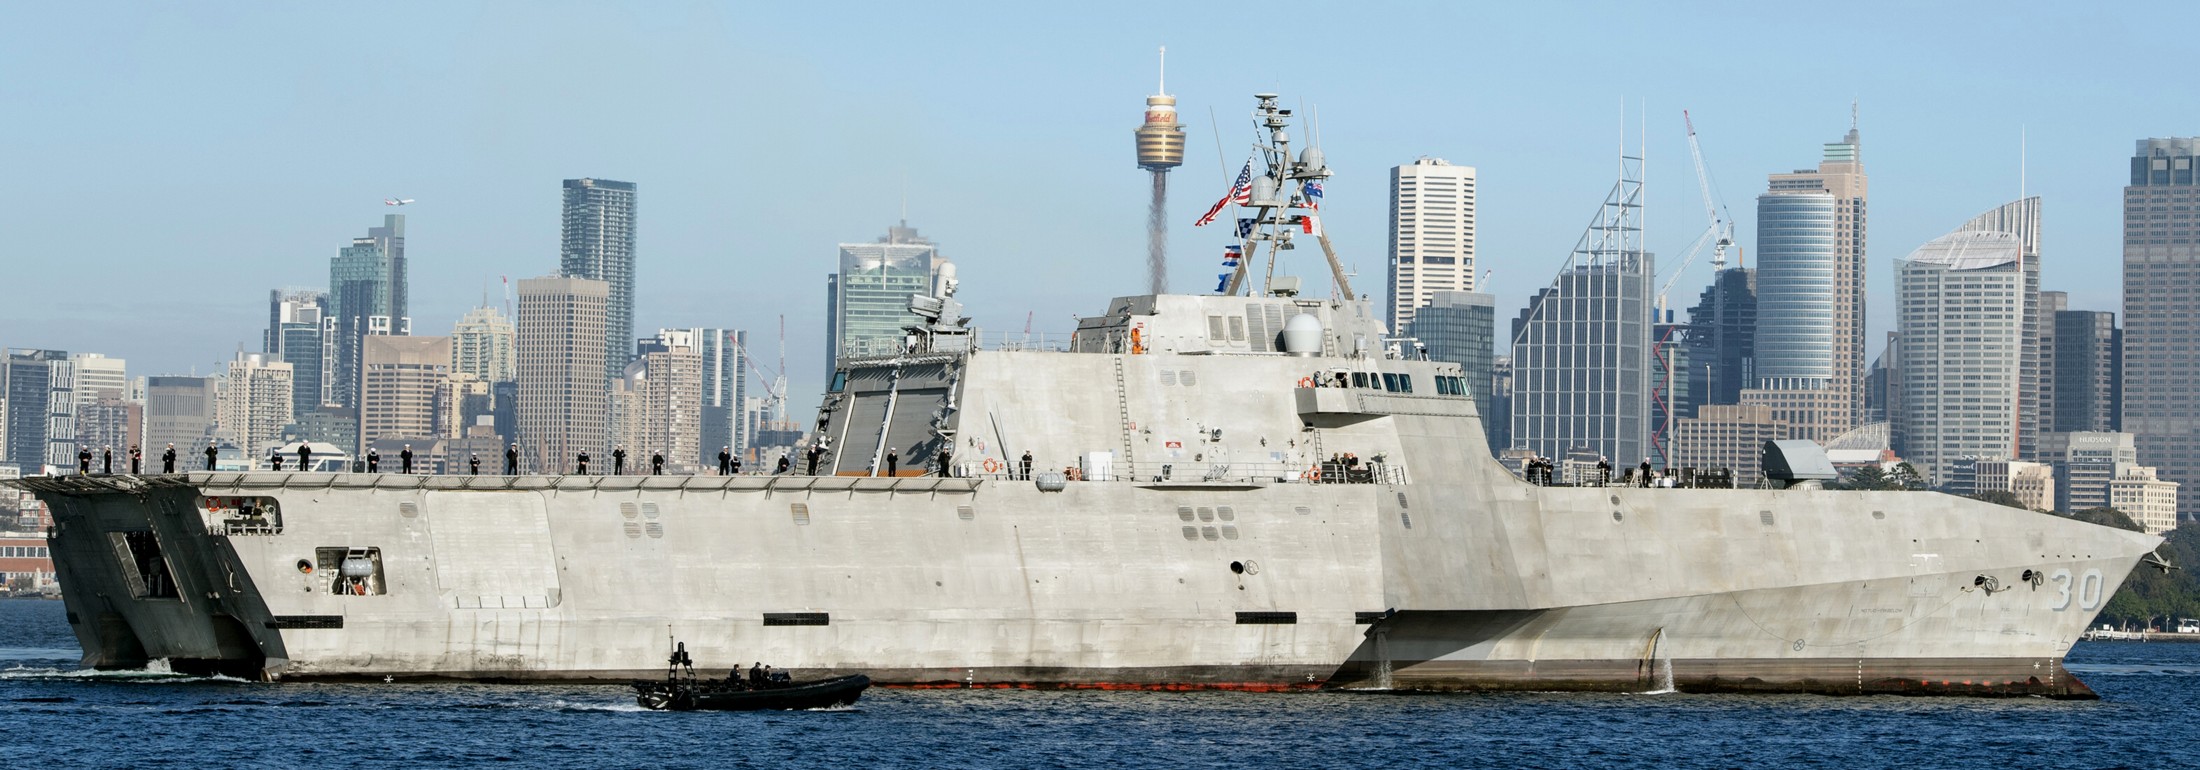 lcs-30 uss canberra littoral combat ship independence class us navy sydney australia 31